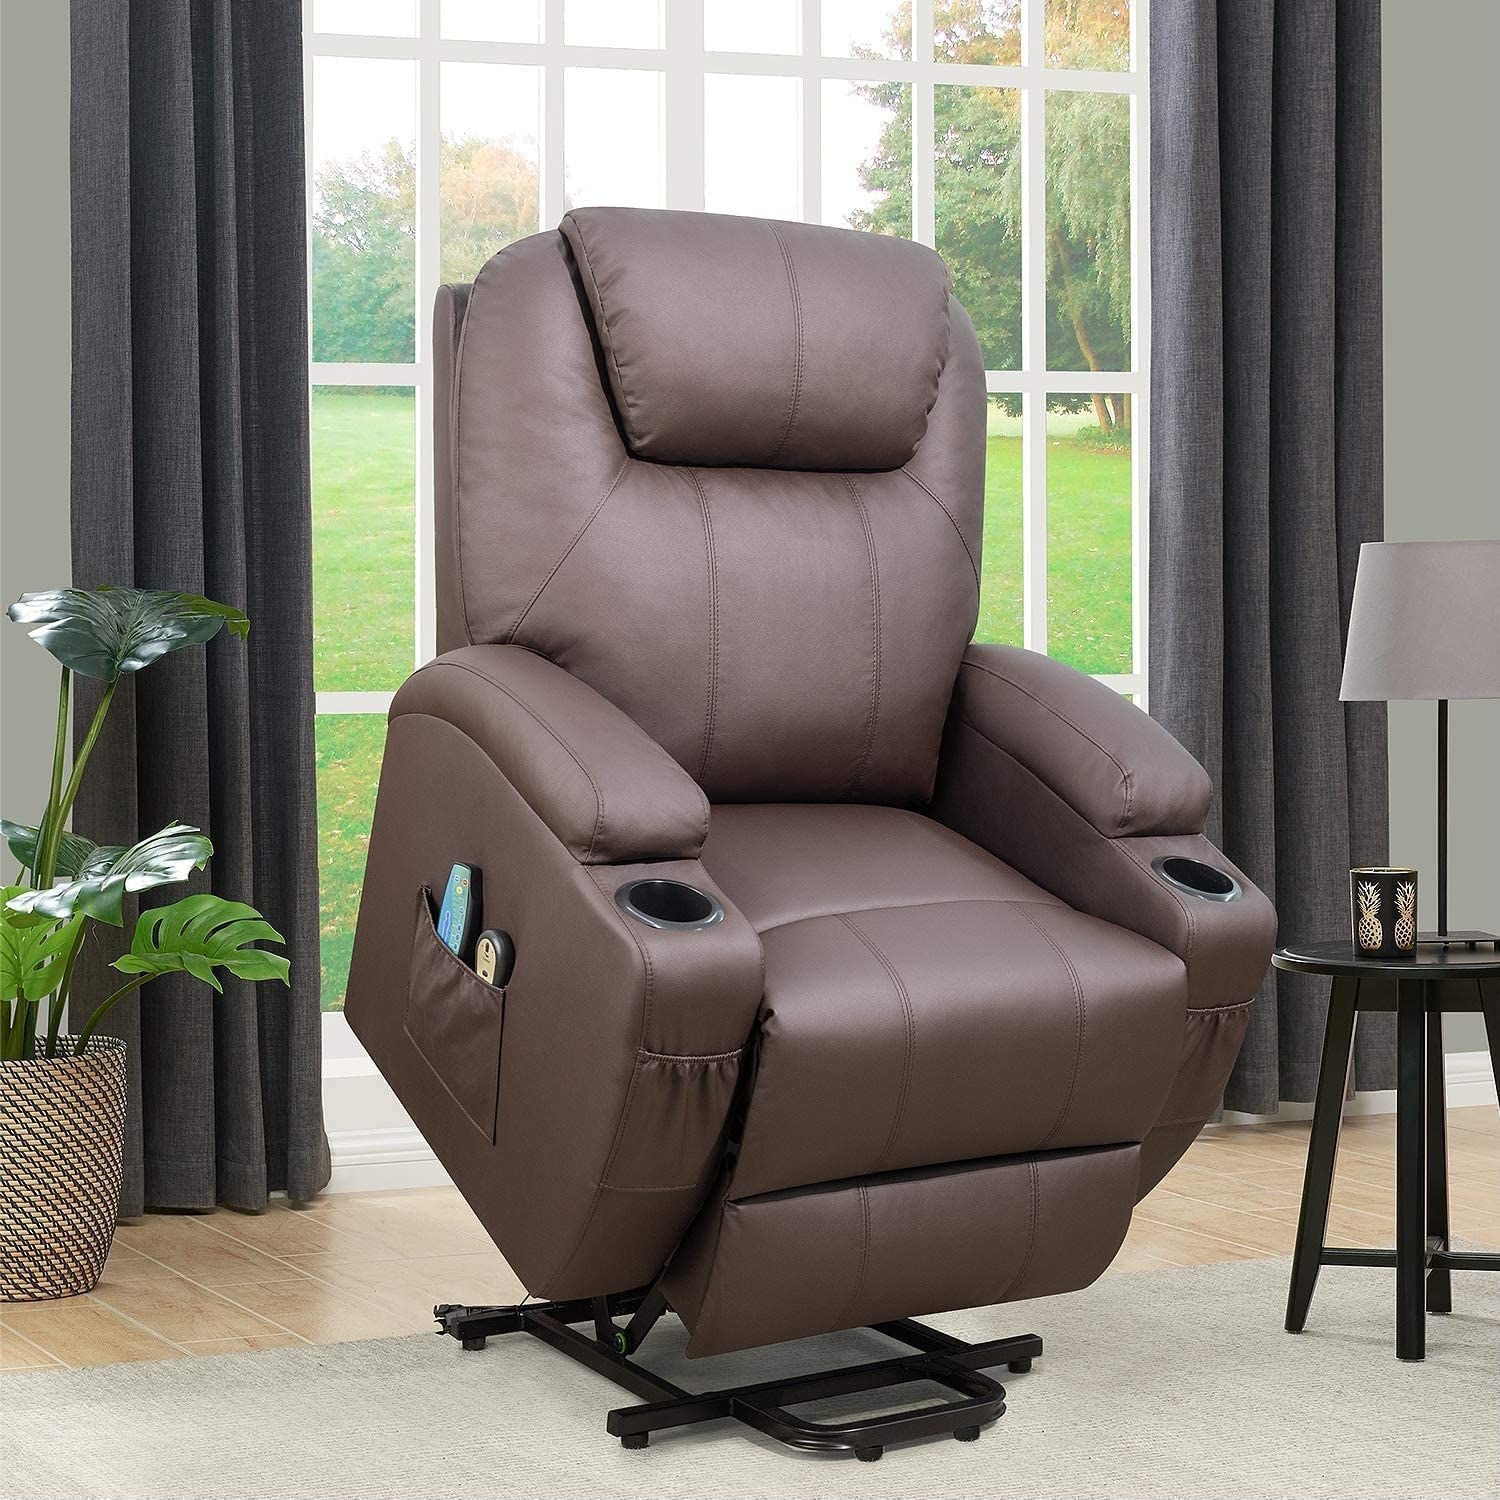 https://ak1.ostkcdn.com/images/products/is/images/direct/83baa4773228d67fc1b395b840362c77dad14933/Power-Lift-Recliner-Chair-PU-Leather-for-Elderly-with-Massage-and-Heating-Ergonomic-Lounge.jpg